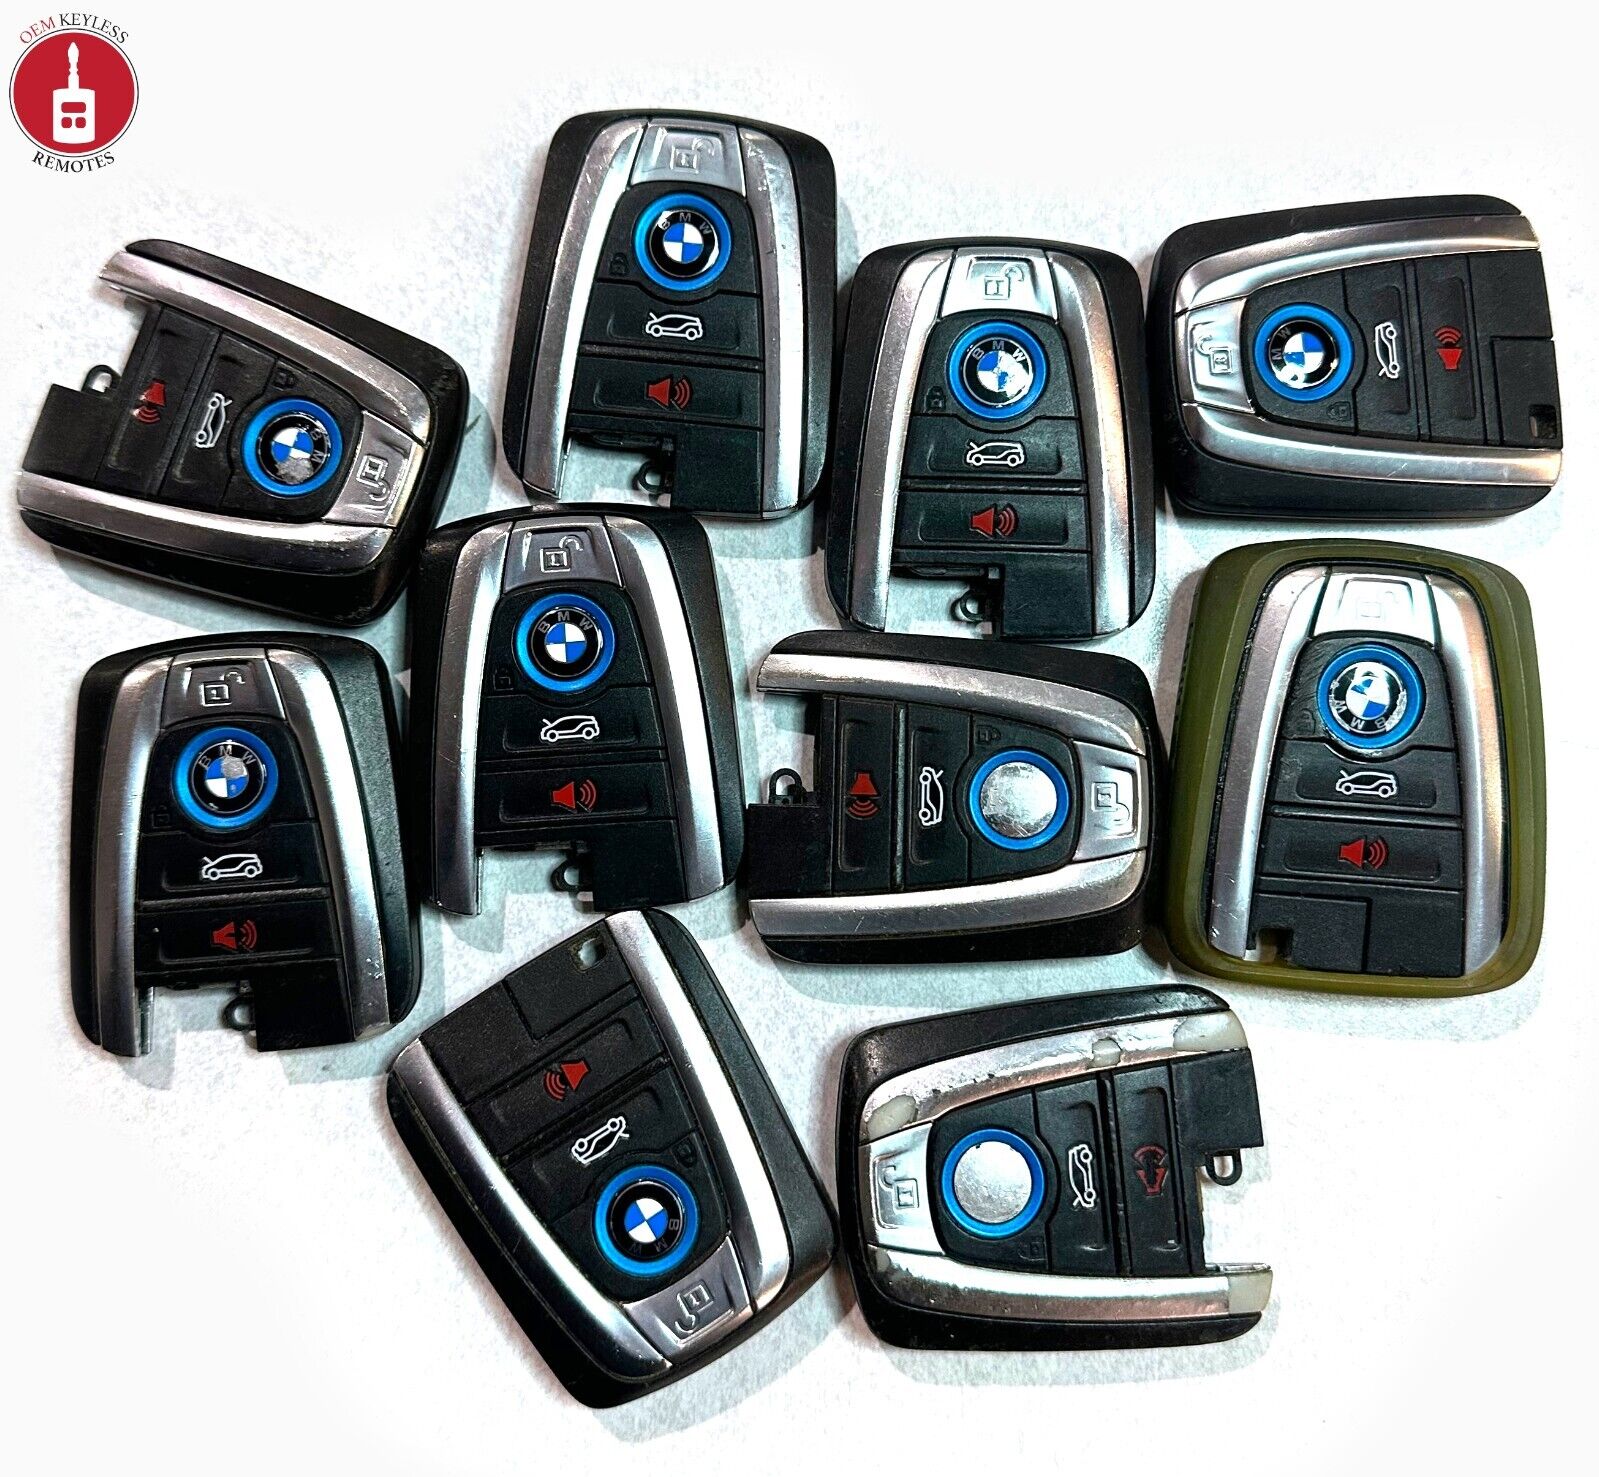 OEM Lot of 10 BMW i3 Remote Keyless Entry Smartkey Fob Replacement NBGIDGNG1